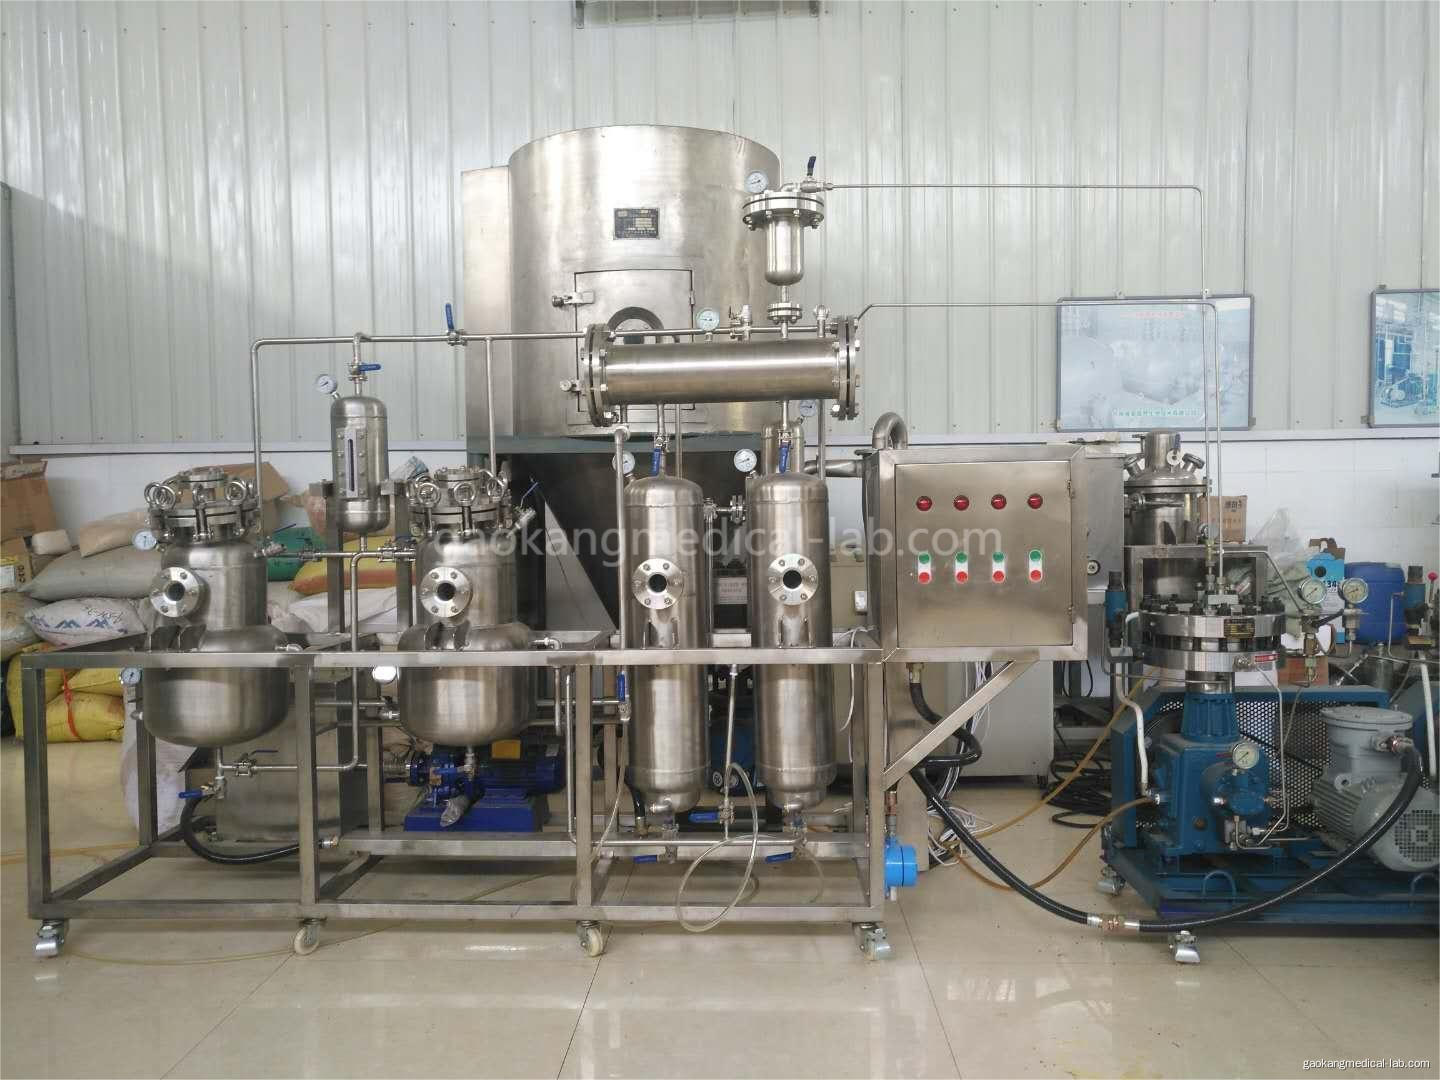 ↘ Solvent Extraction Machine Plant Introduction